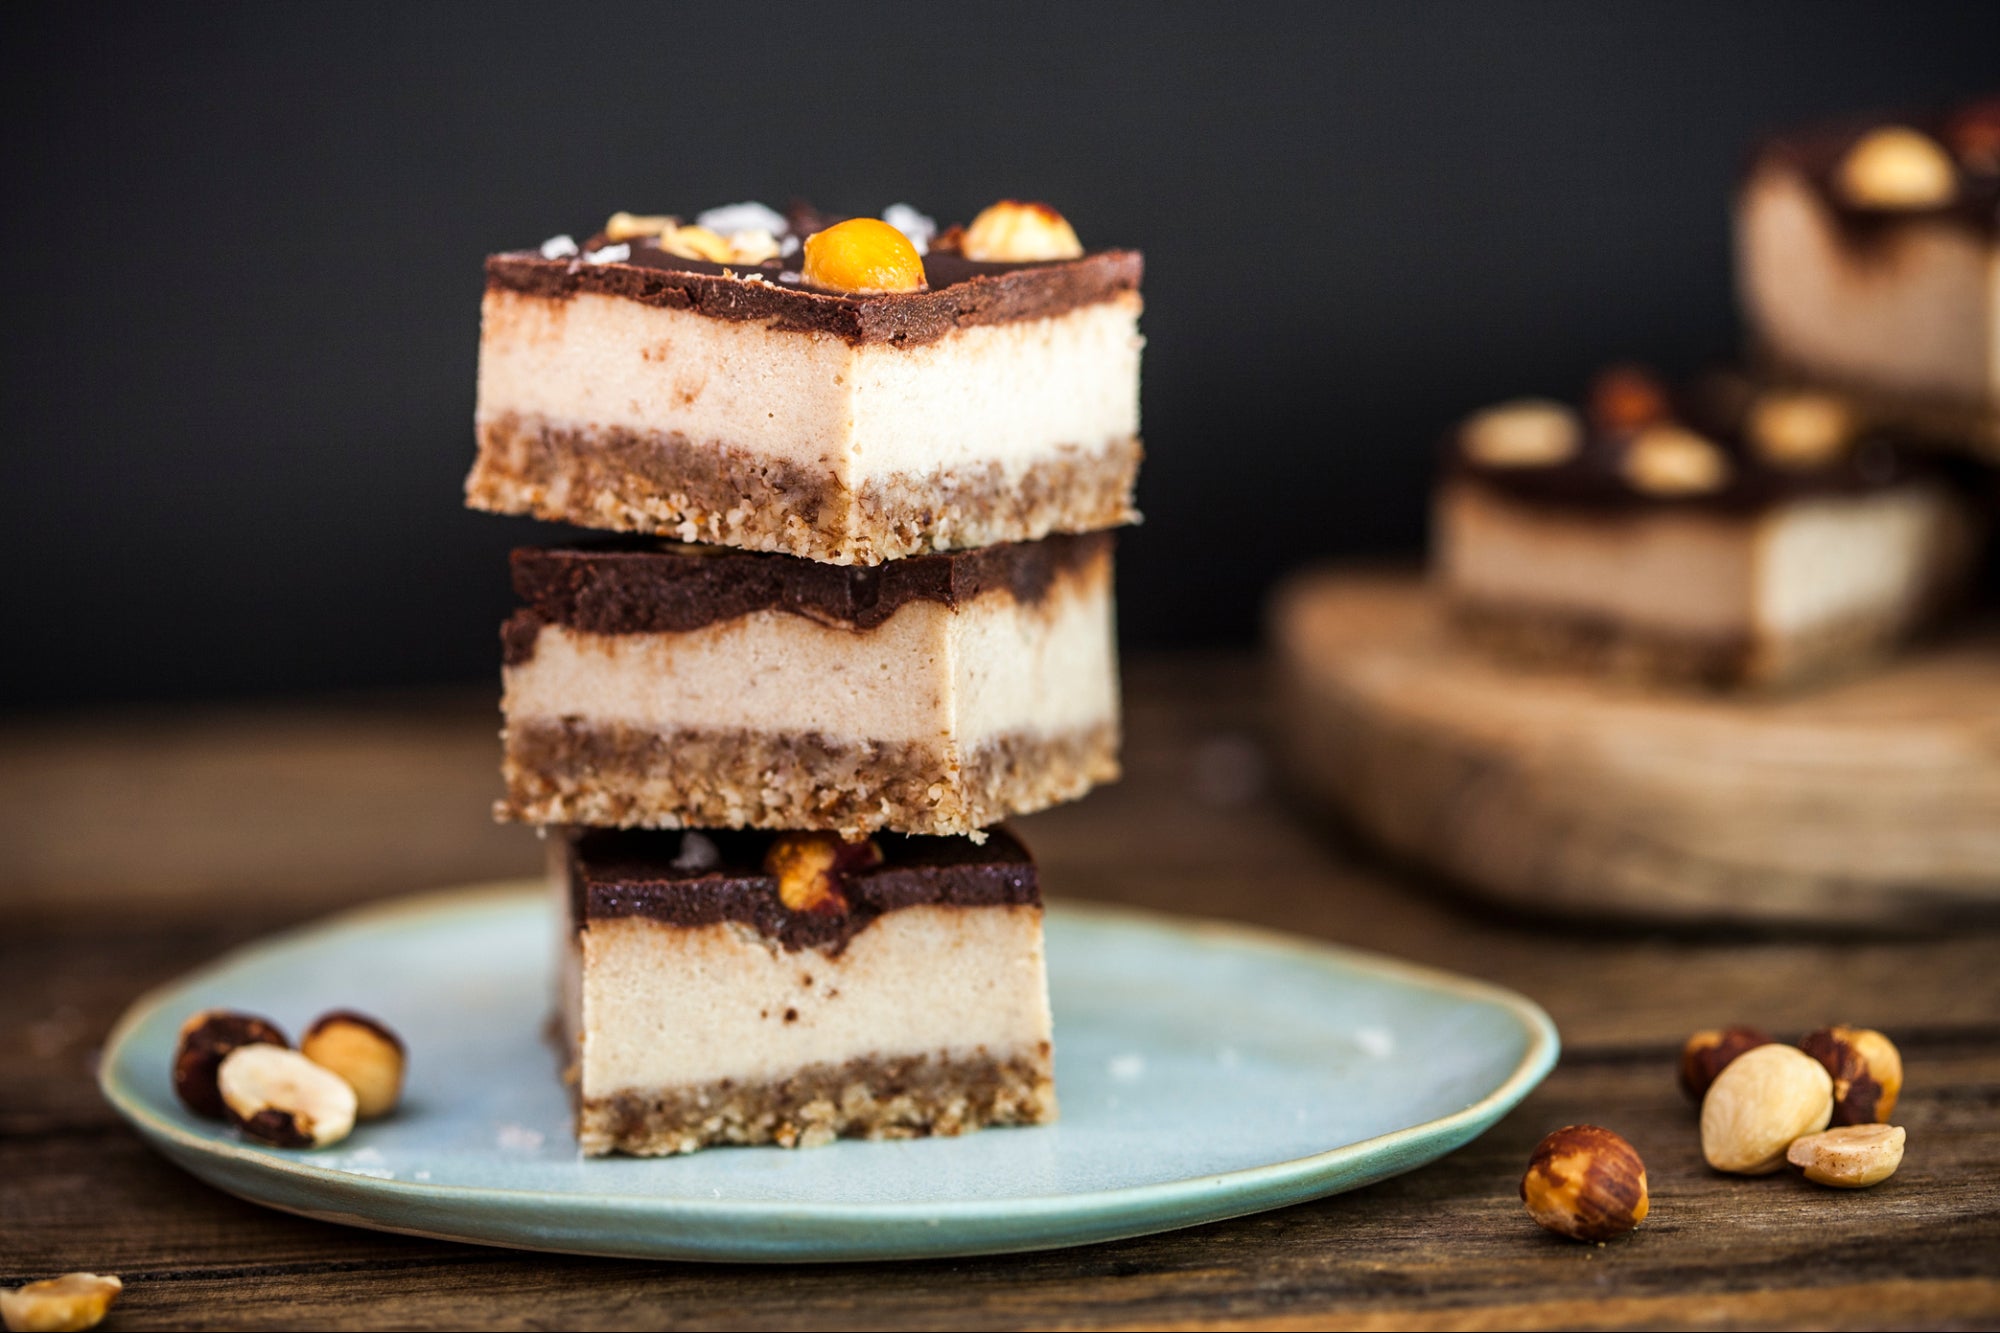 Plant-Based Eating Isn’t Just Salads And Beans. The Vegan Dessert Market Continues To Grow.